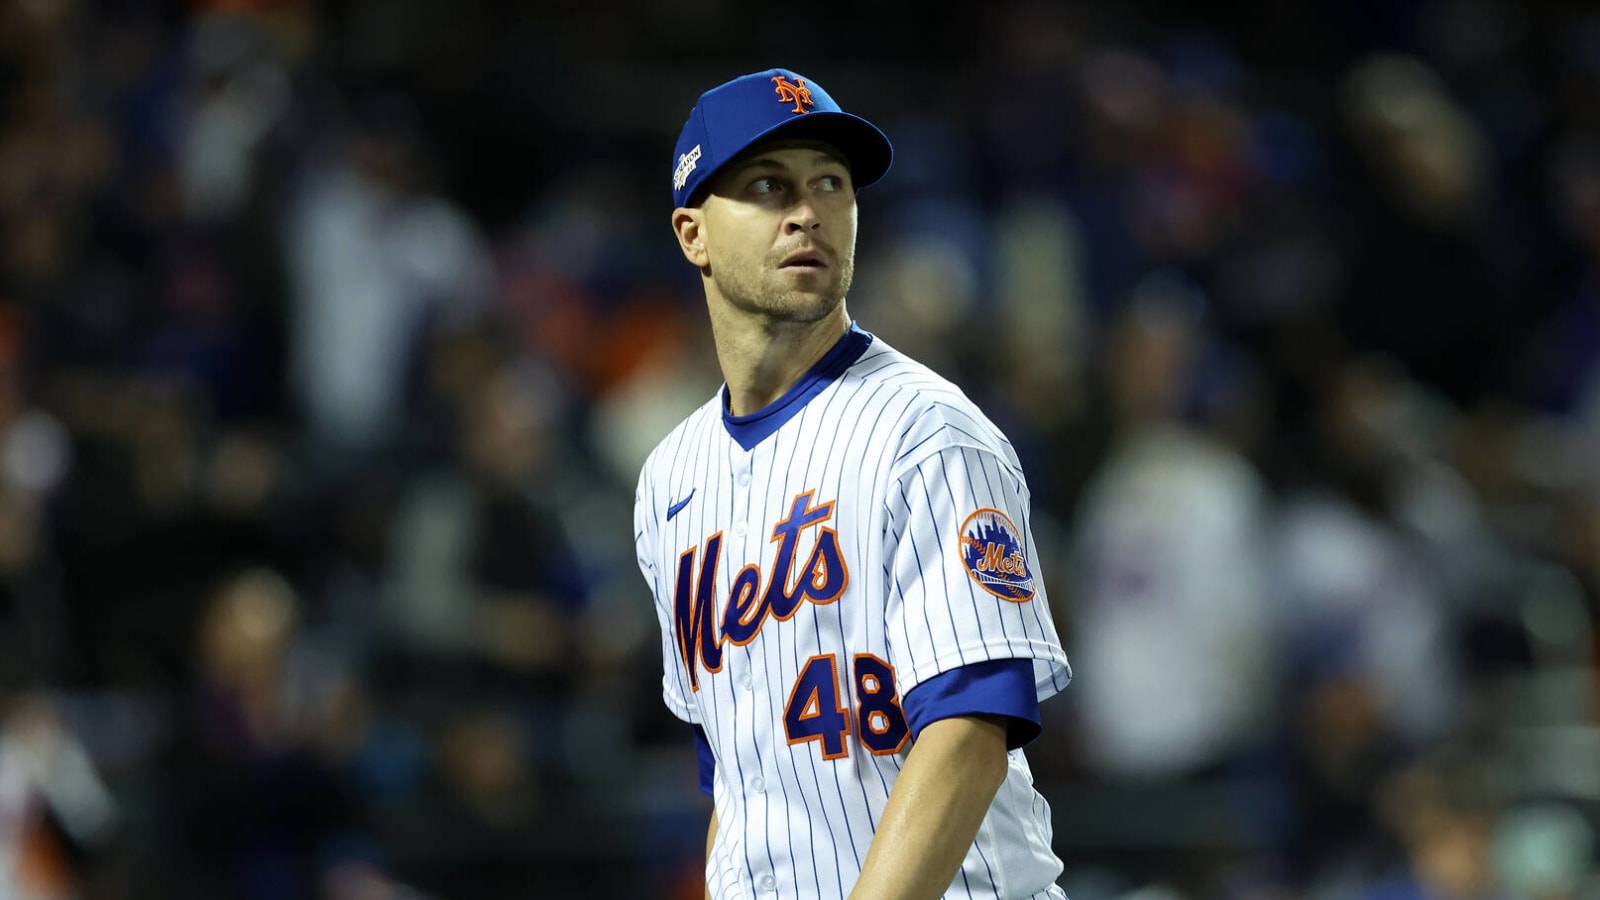 Mets' Mark Canha: Jacob deGrom 'told me he wanted to stay and I am sure he did'